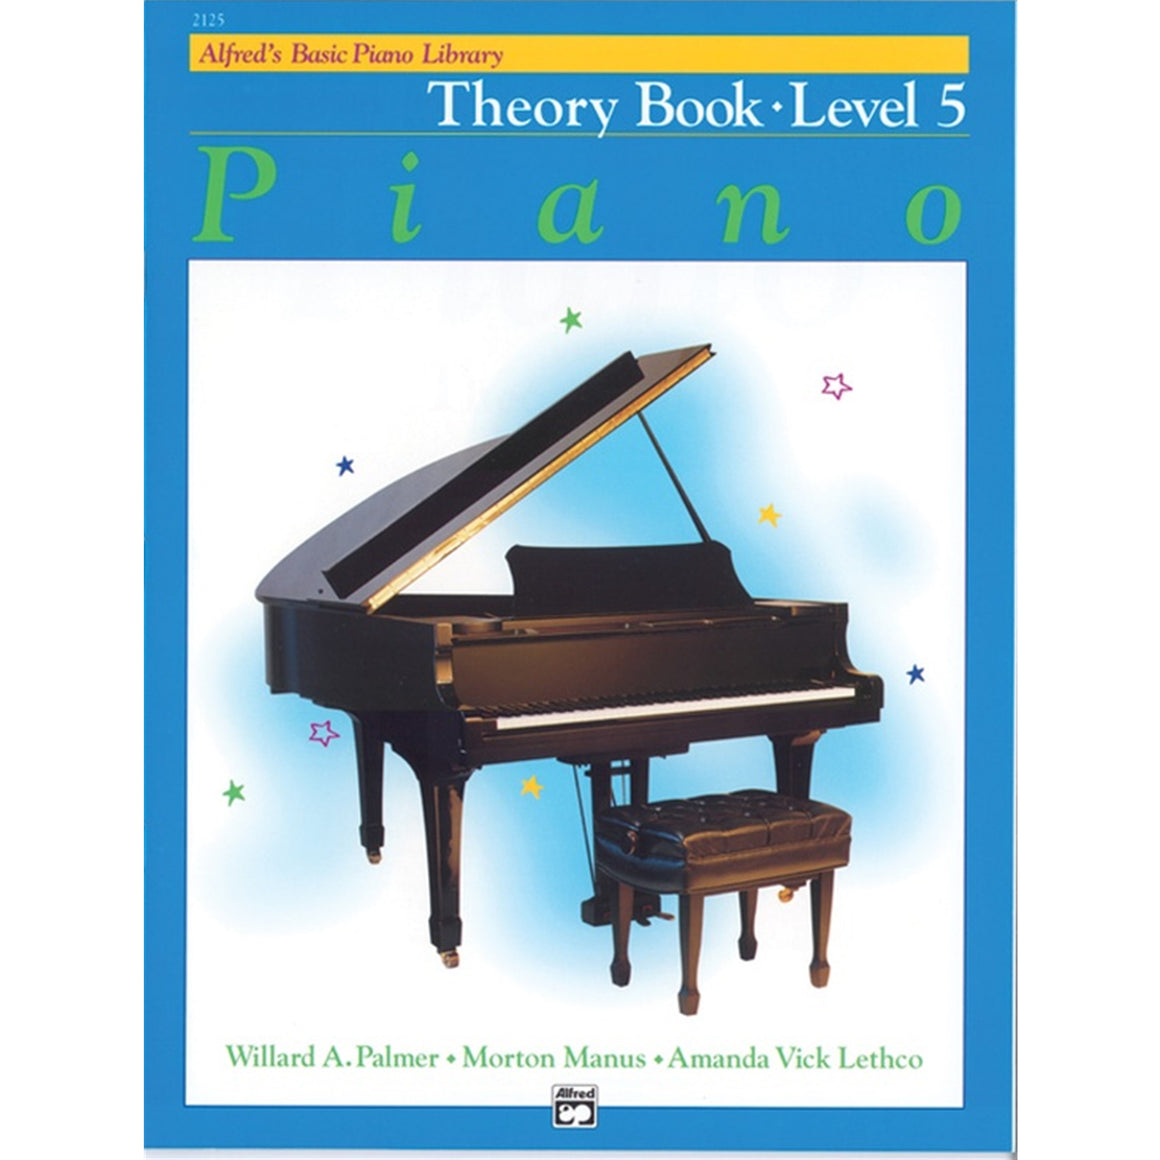 ALFRED 2125 Alfred's Basic Piano Course: Theory Book 5